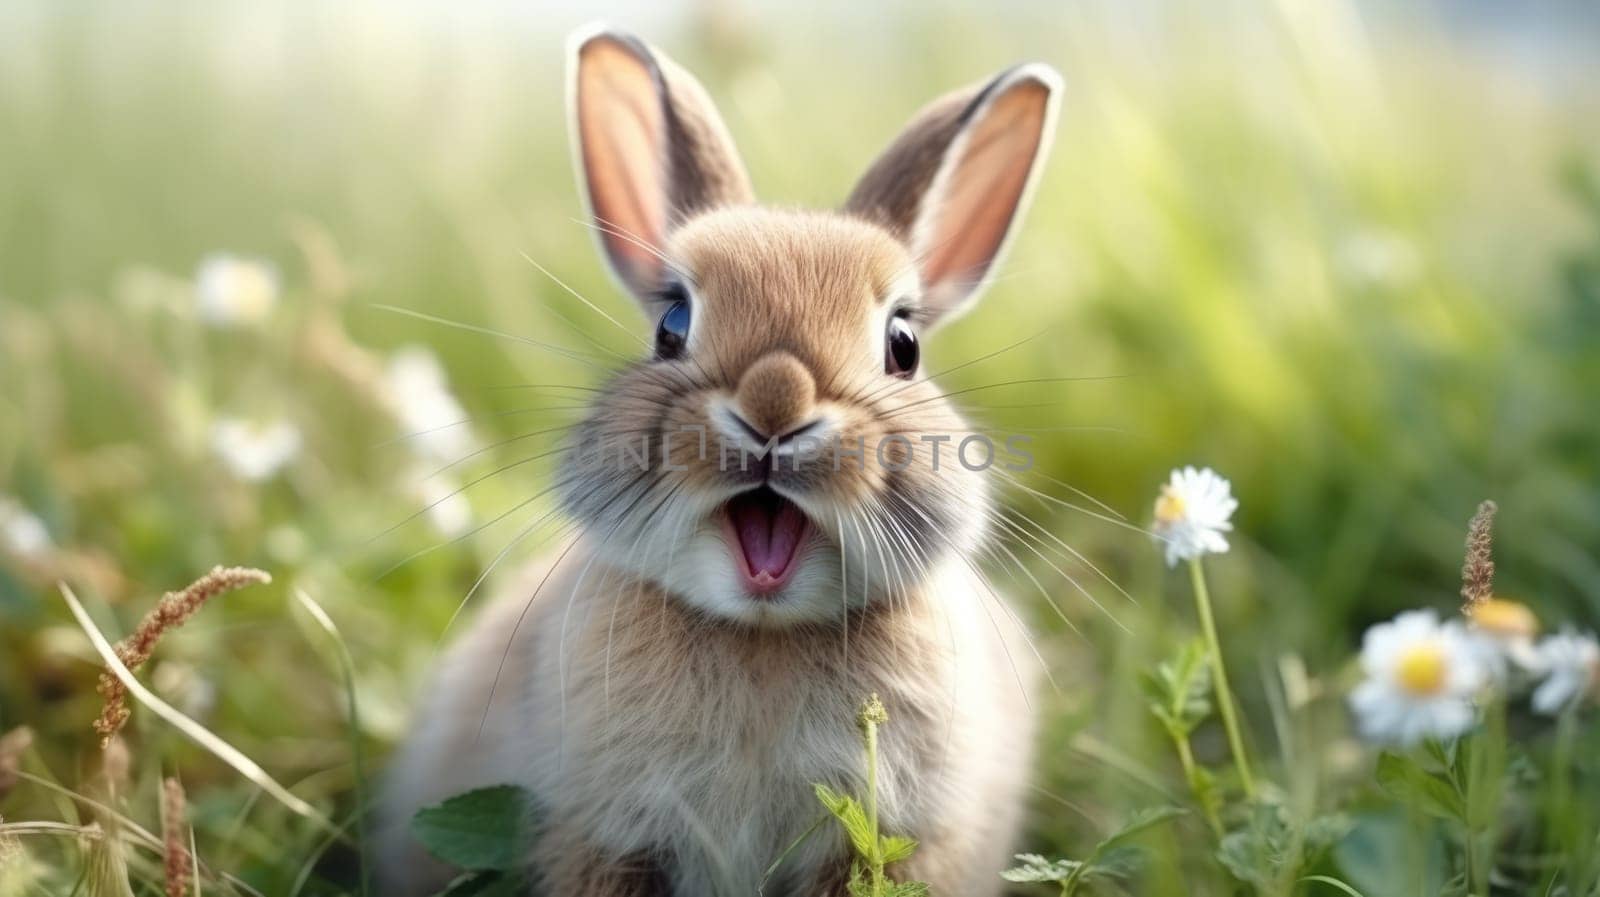 Surprised Funny Cute Bunny with Big Eyes on green grass and blue sky Background, Cute Animal Portrait by JuliaDorian